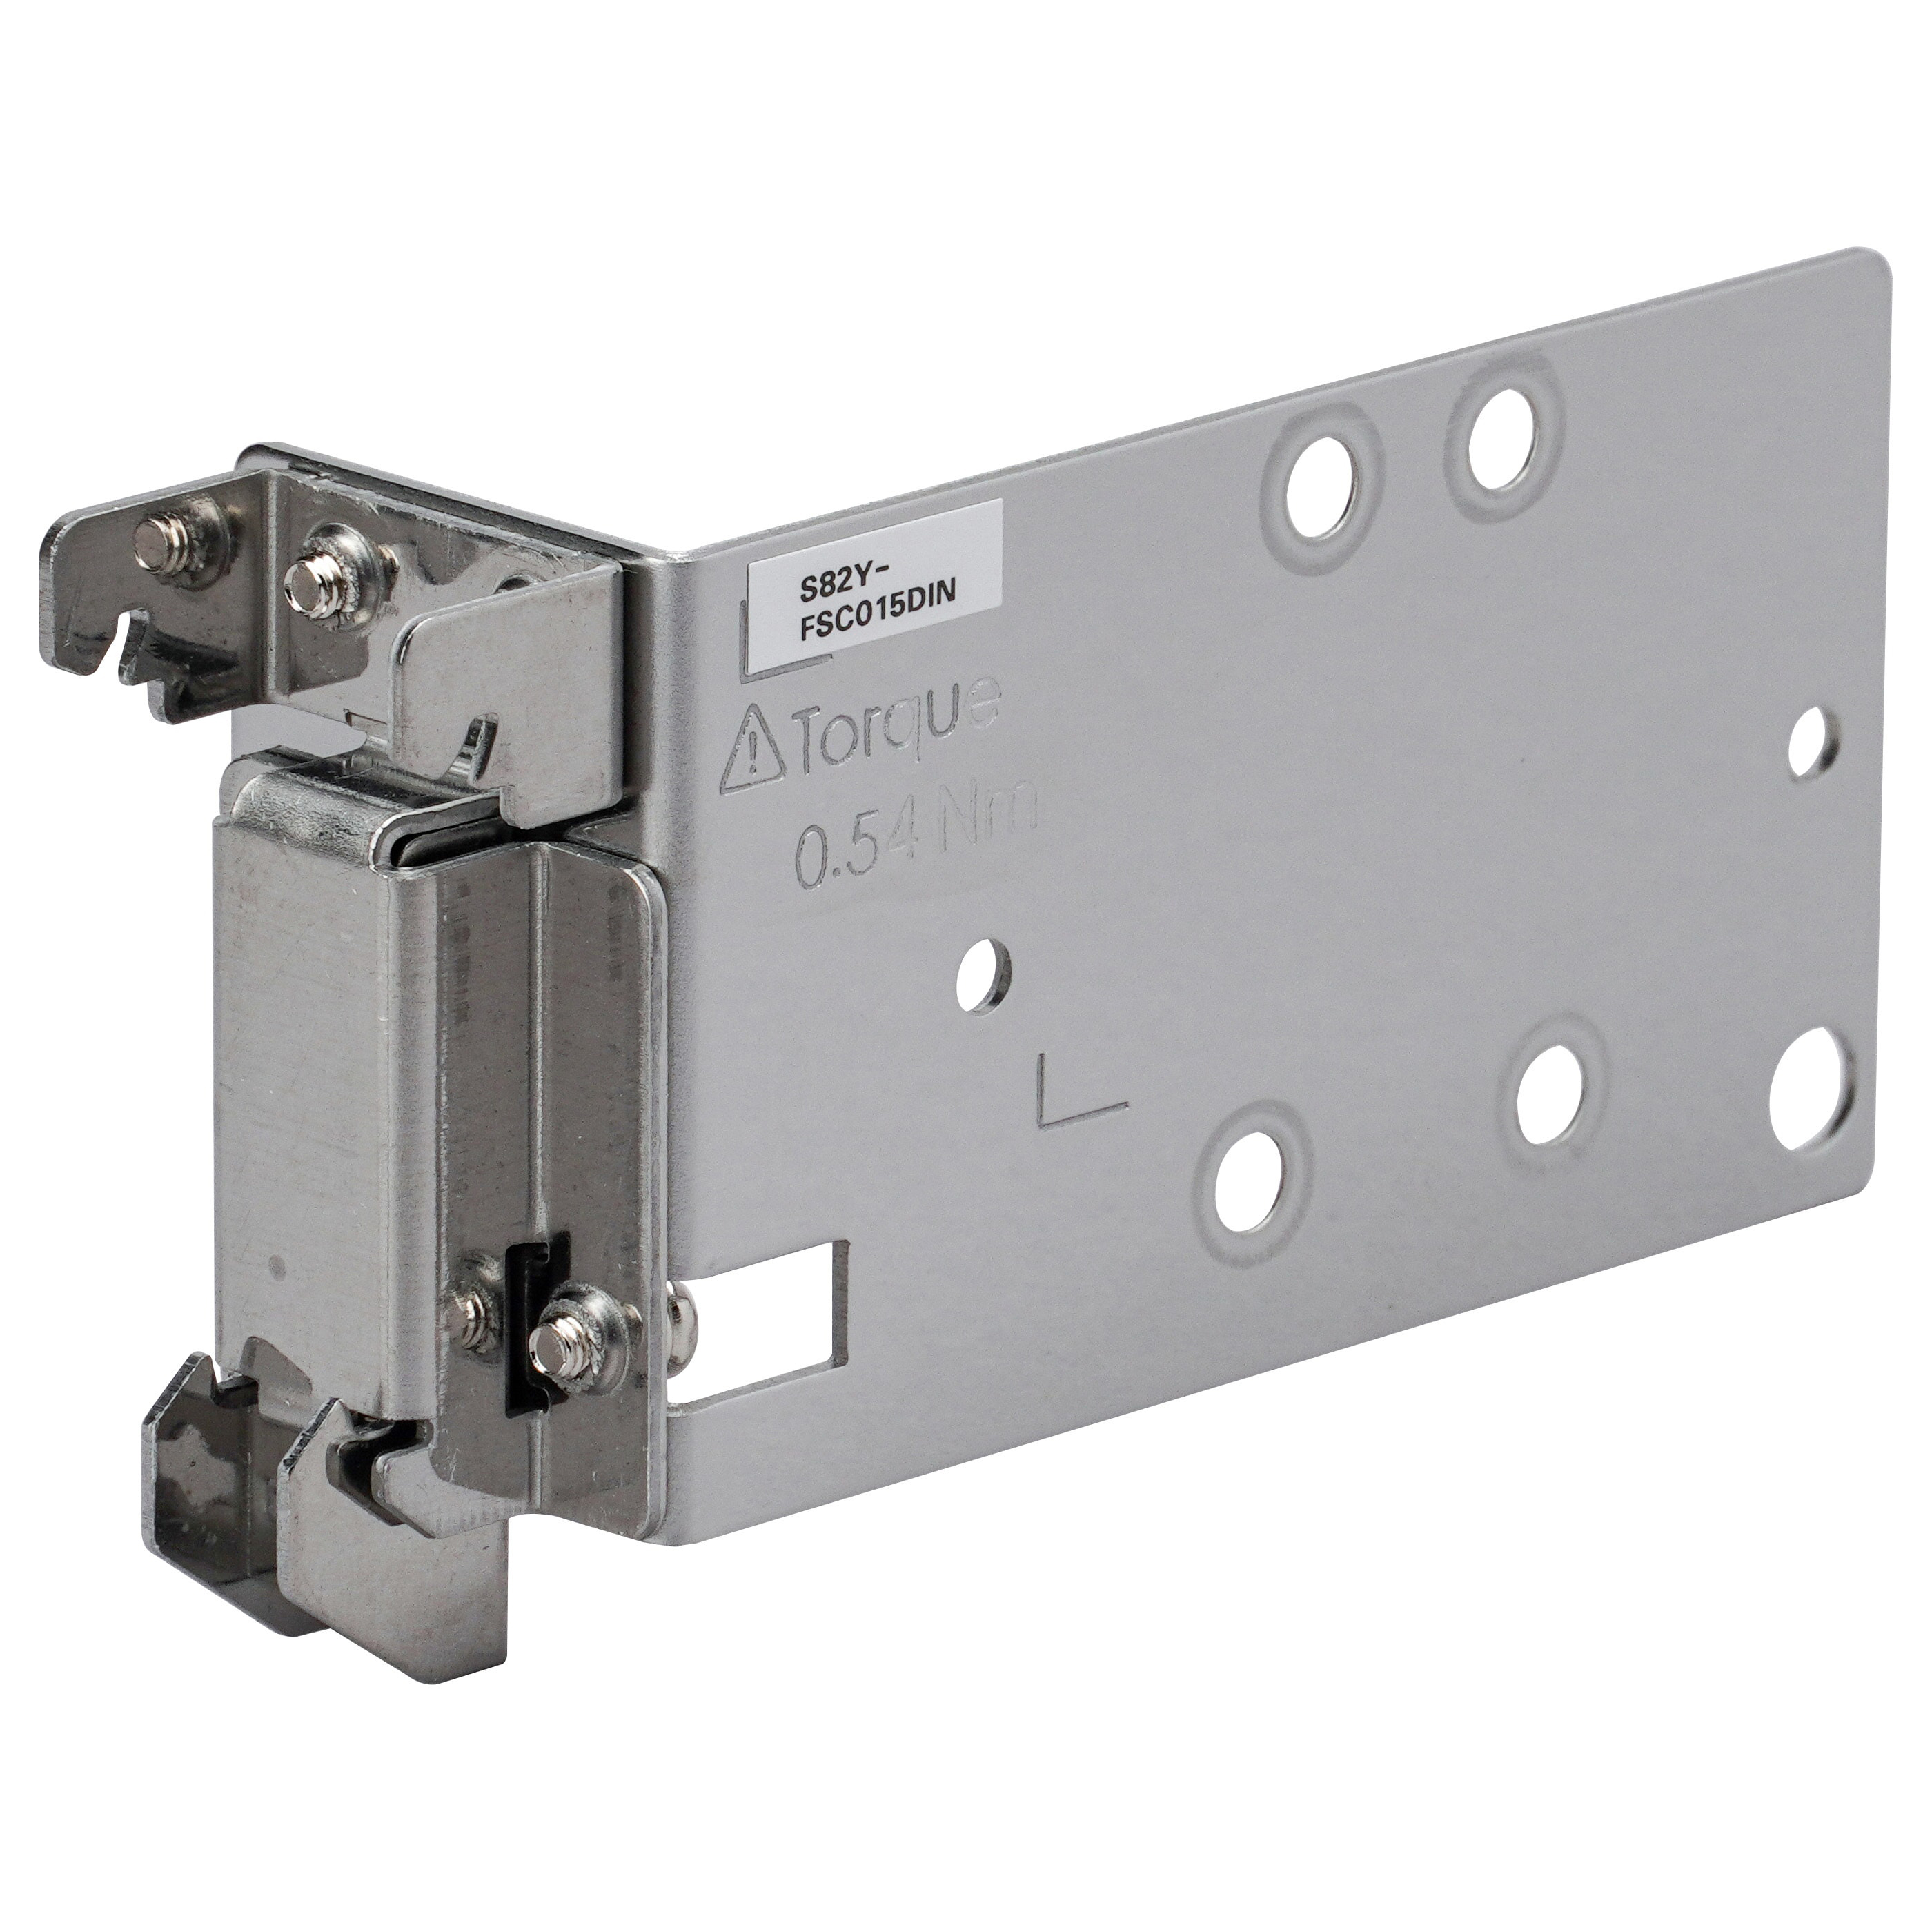 Mounting Brackets for Switch Mode Power Supply S8FS-C S82Y-FSC050DIN